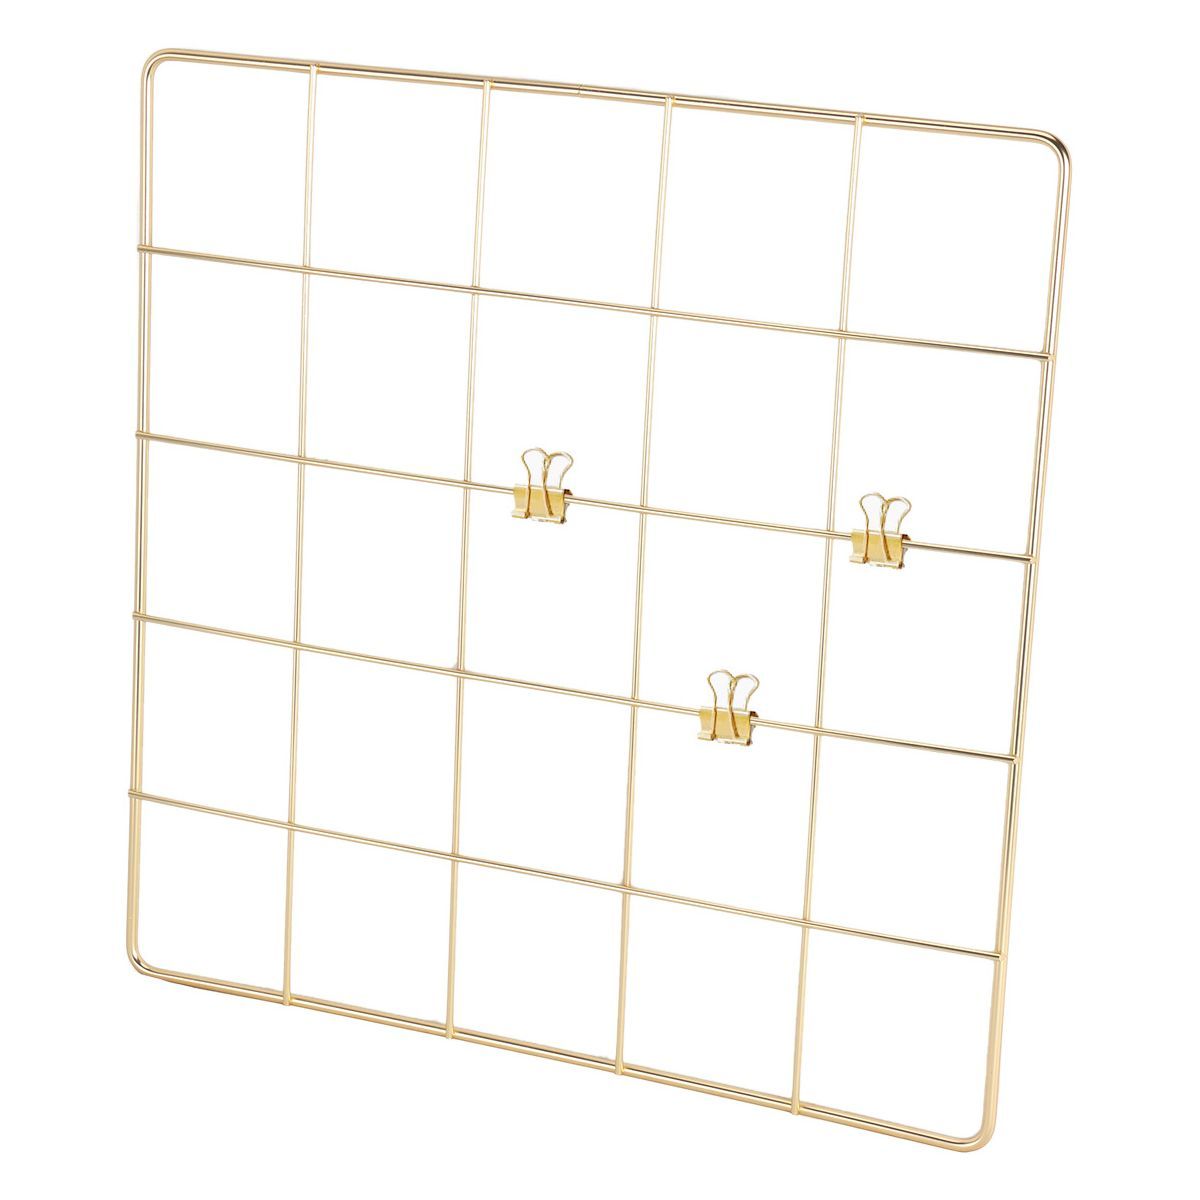 Grid Wall Organizer with Clips - Threshold™ | Target